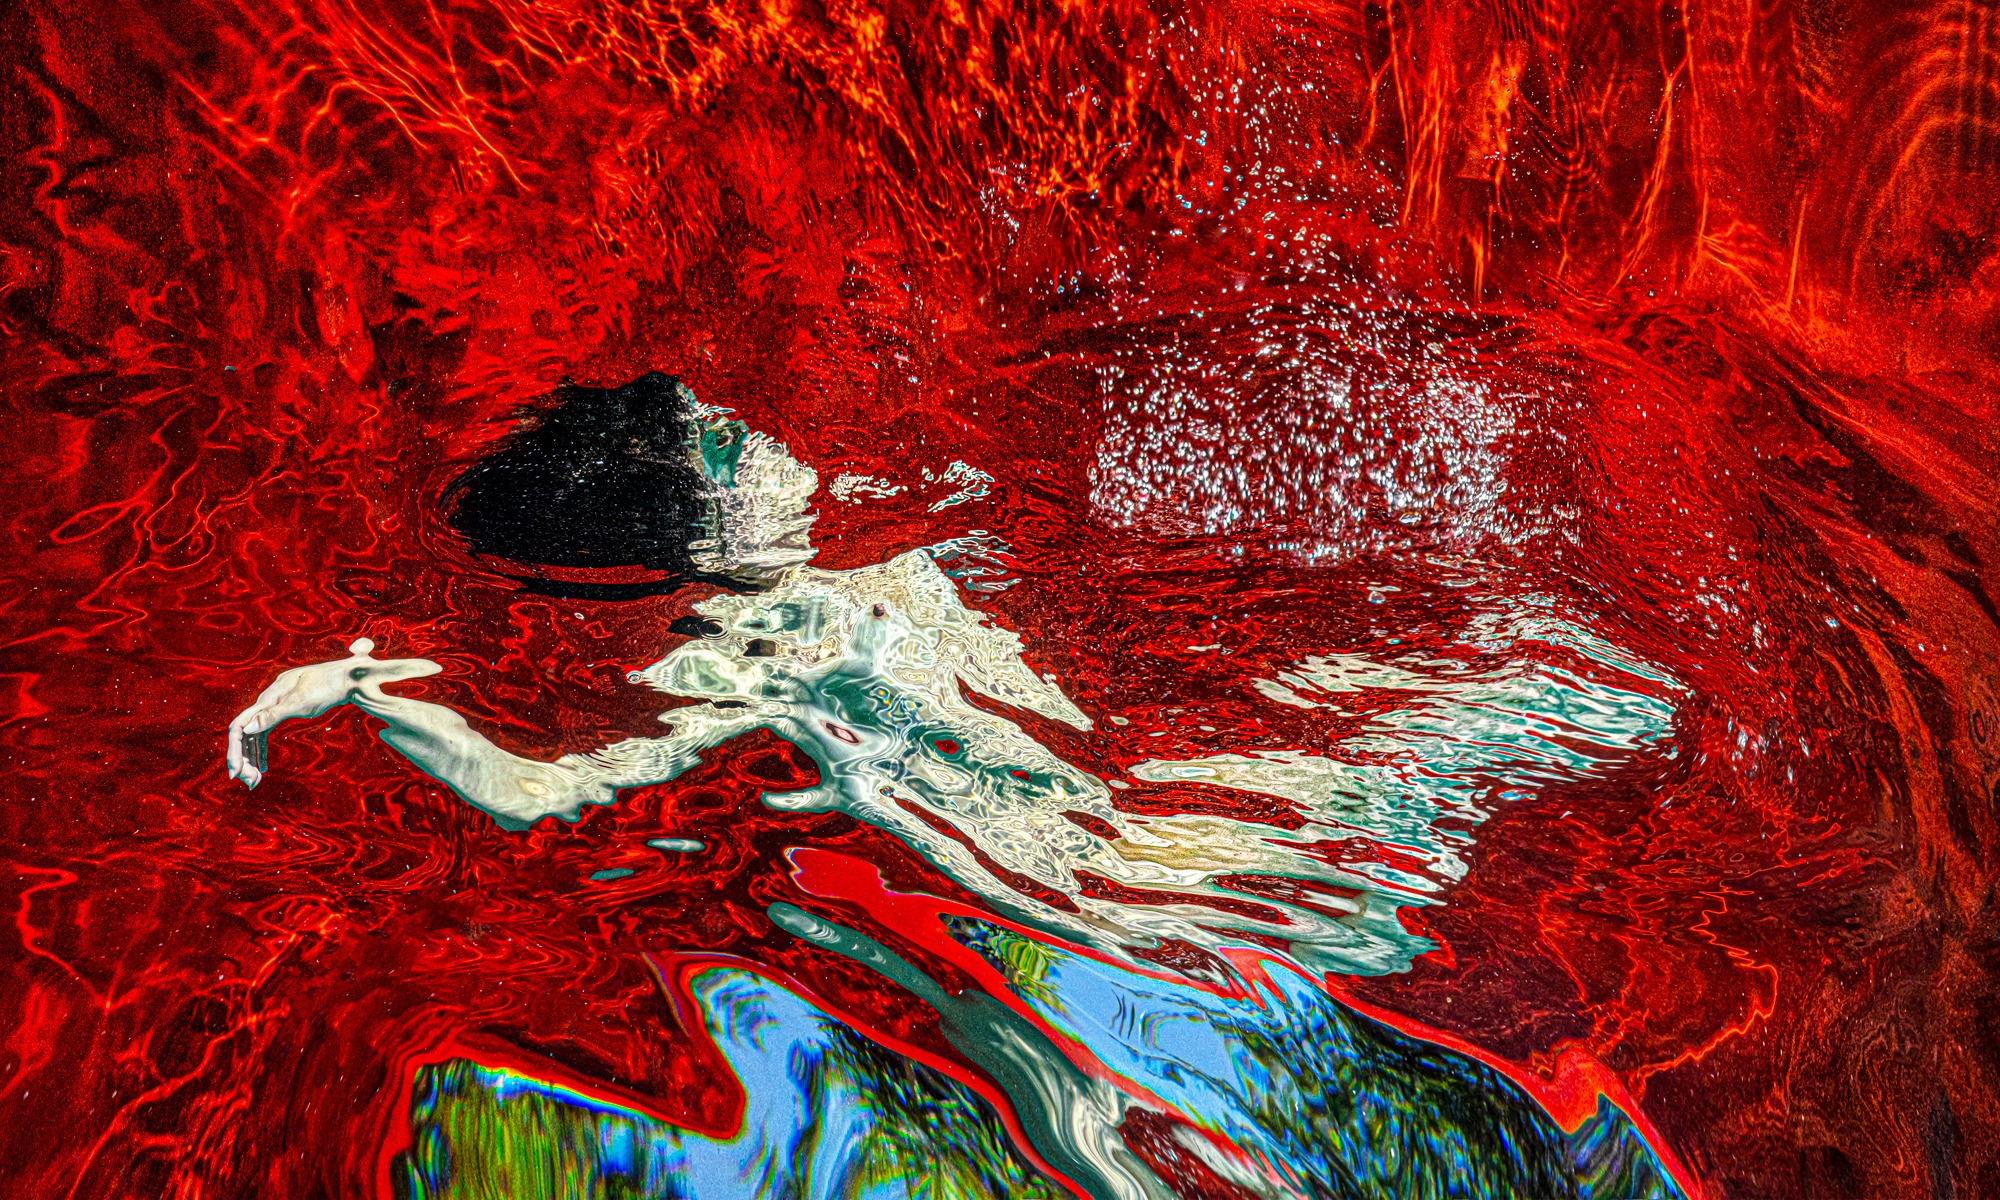 Private Pool - underwater nude photograph from series REFLECTIONS - print on aluminum 22x36